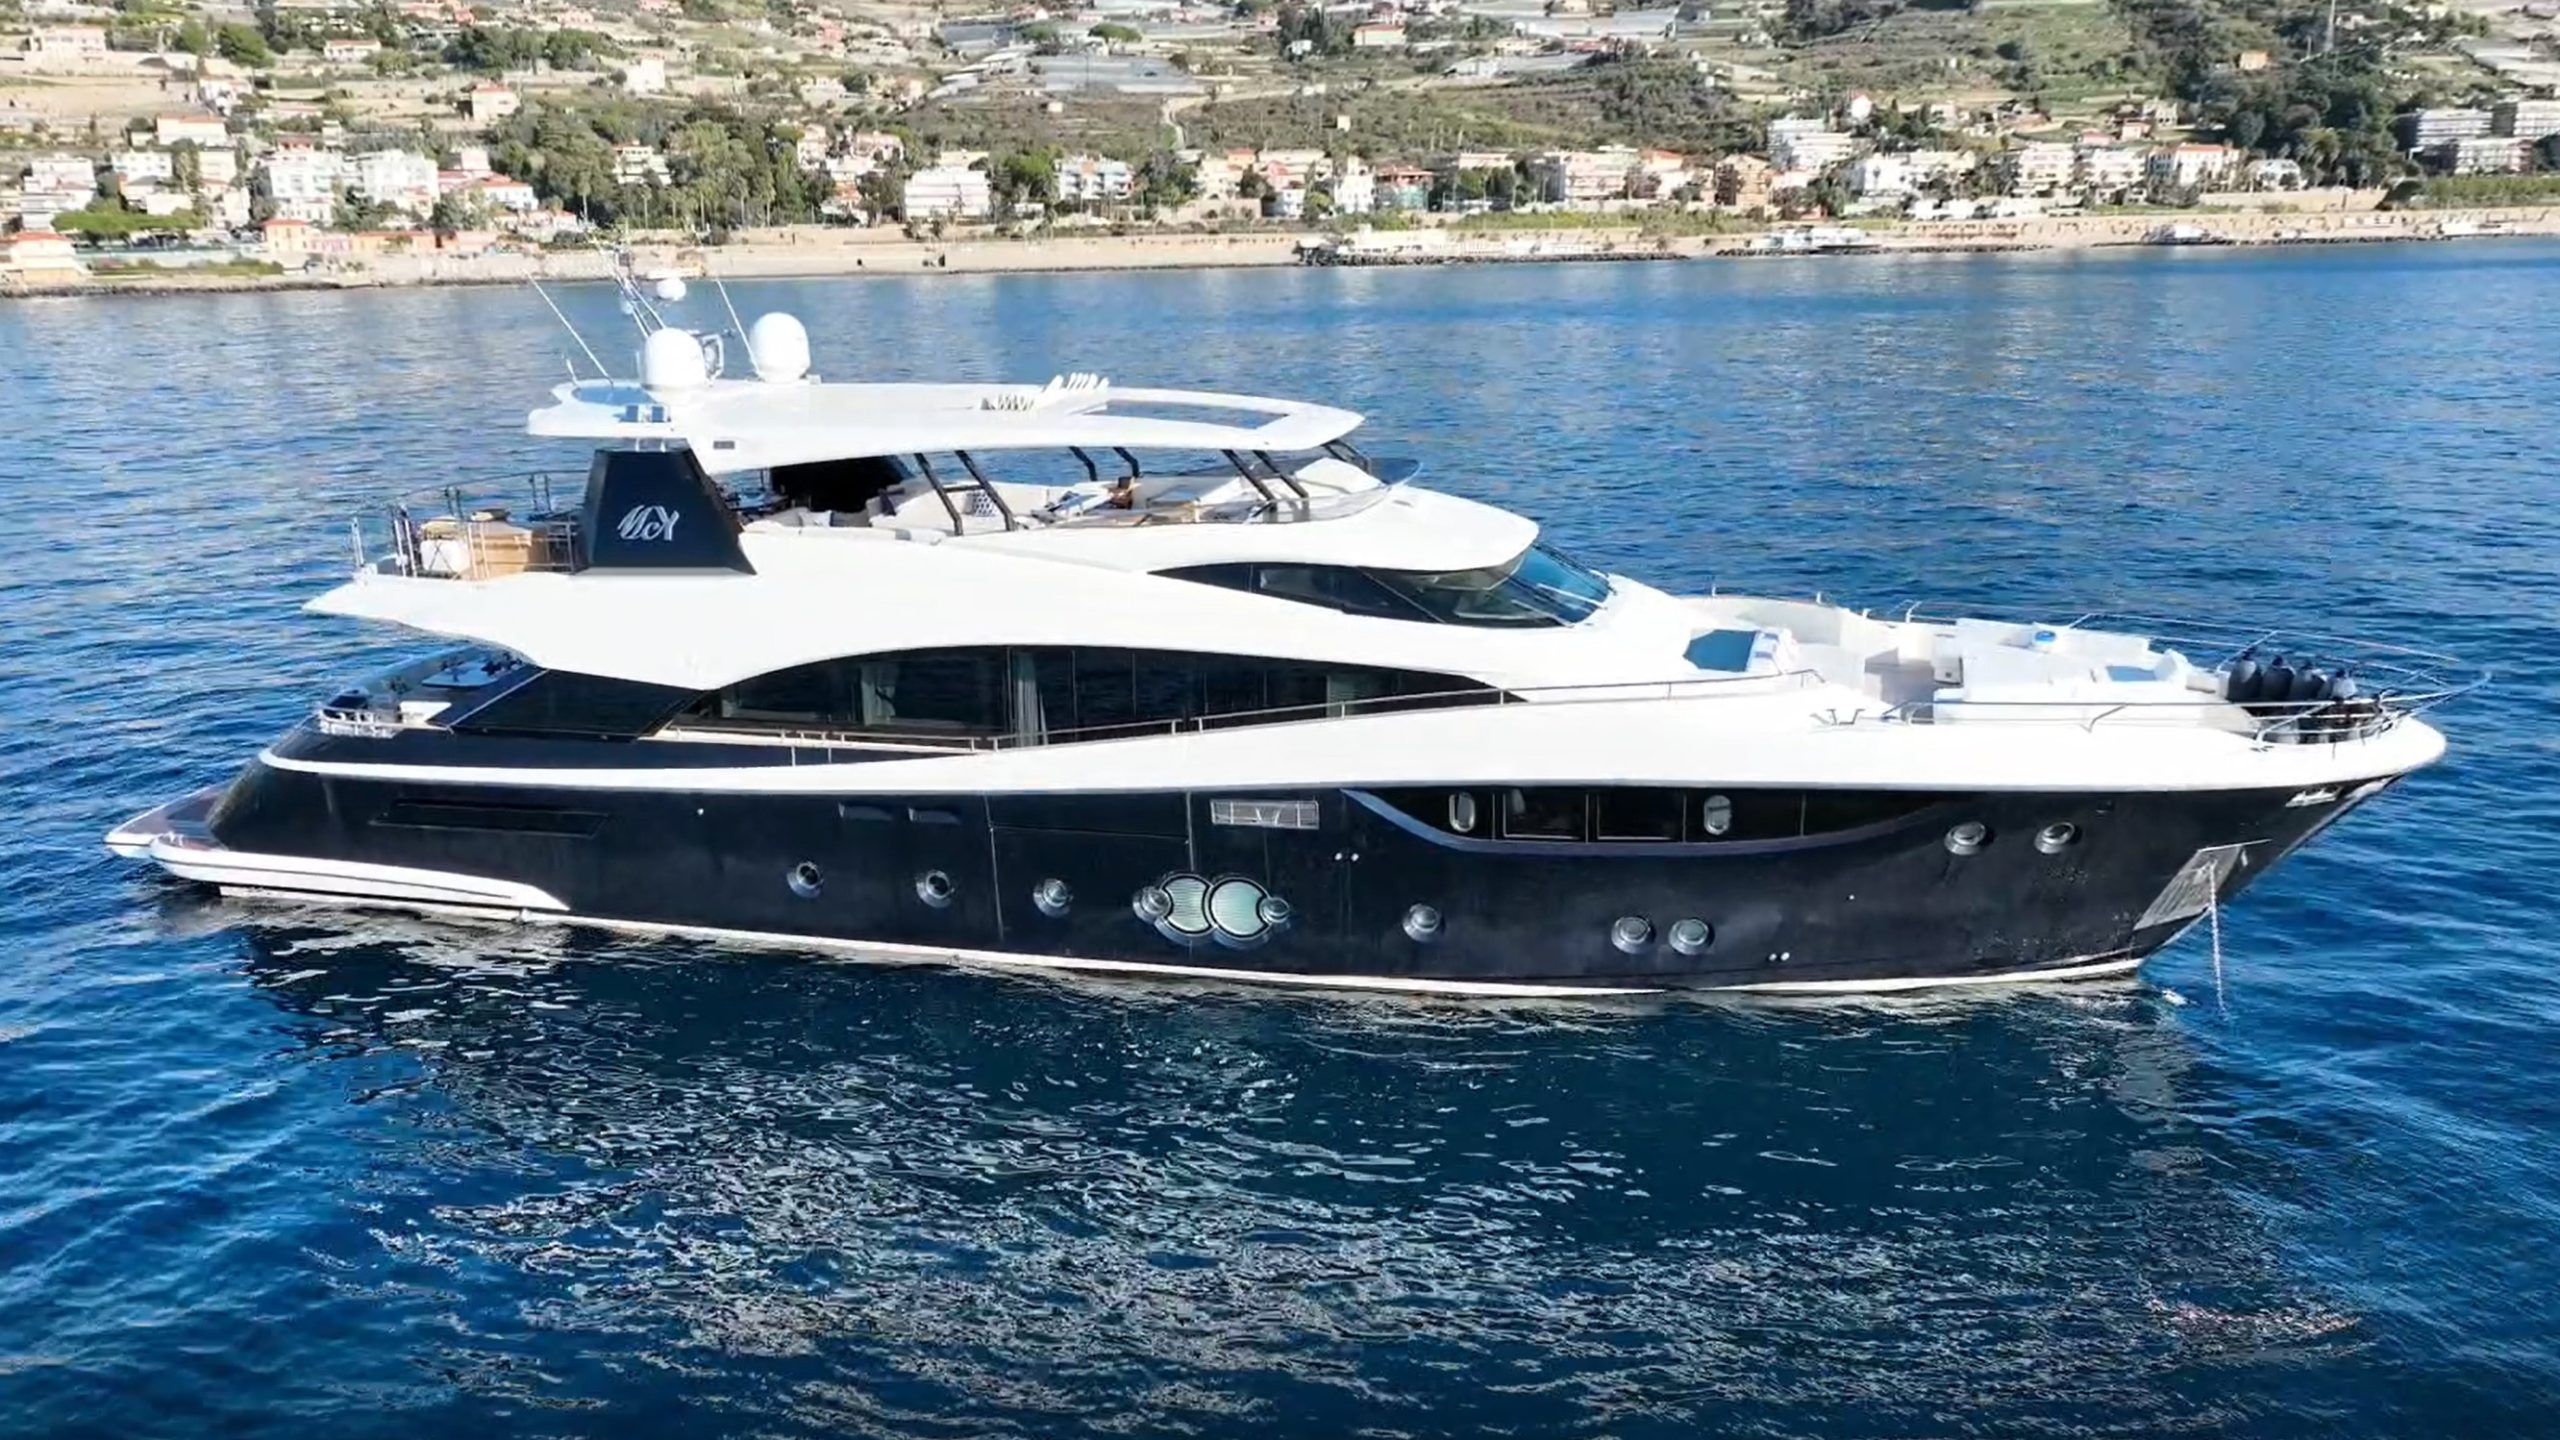 Superyacht for sale: Lady Marisa is available now!